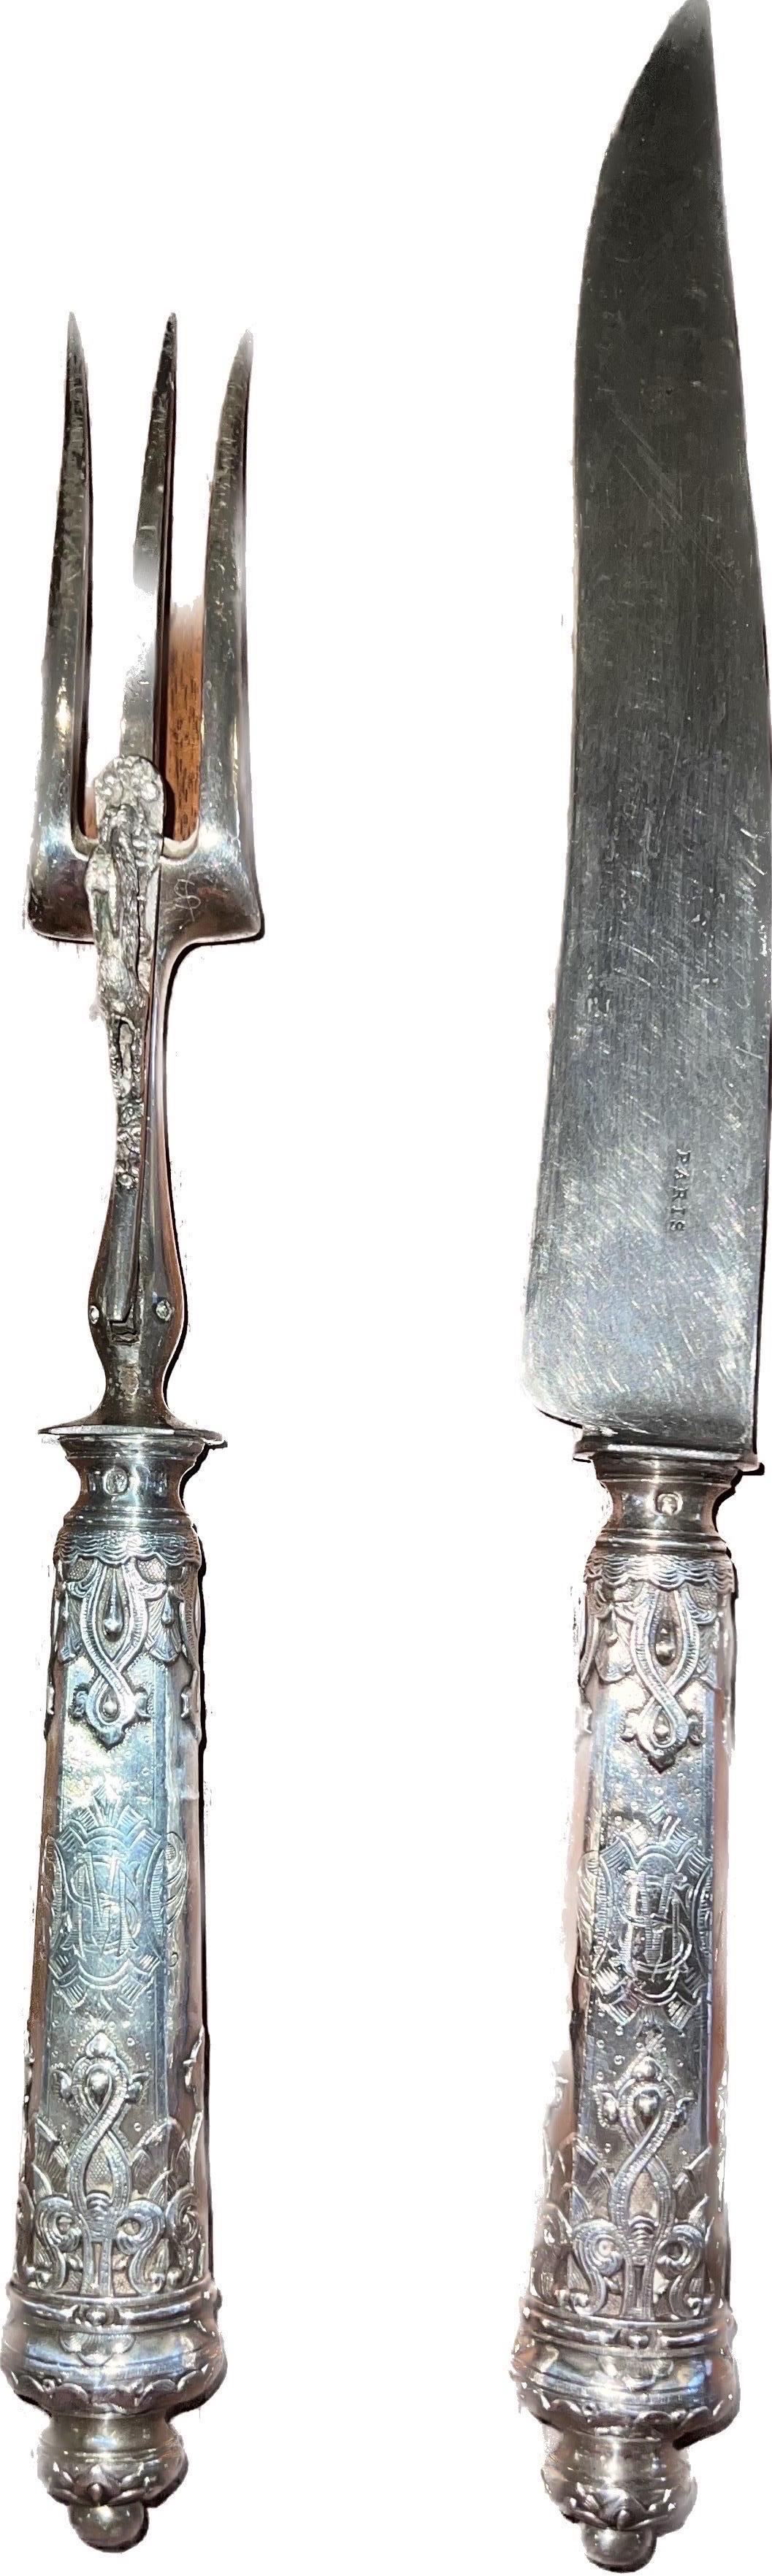 Mr. Giallo is opening his personal vault to sell a collection of his treasured antiques he's held on for so long.

About item
French Early 19th C. Sterling Silver Carving Set. Sterling silver handle with steel blade. Just stunning! This